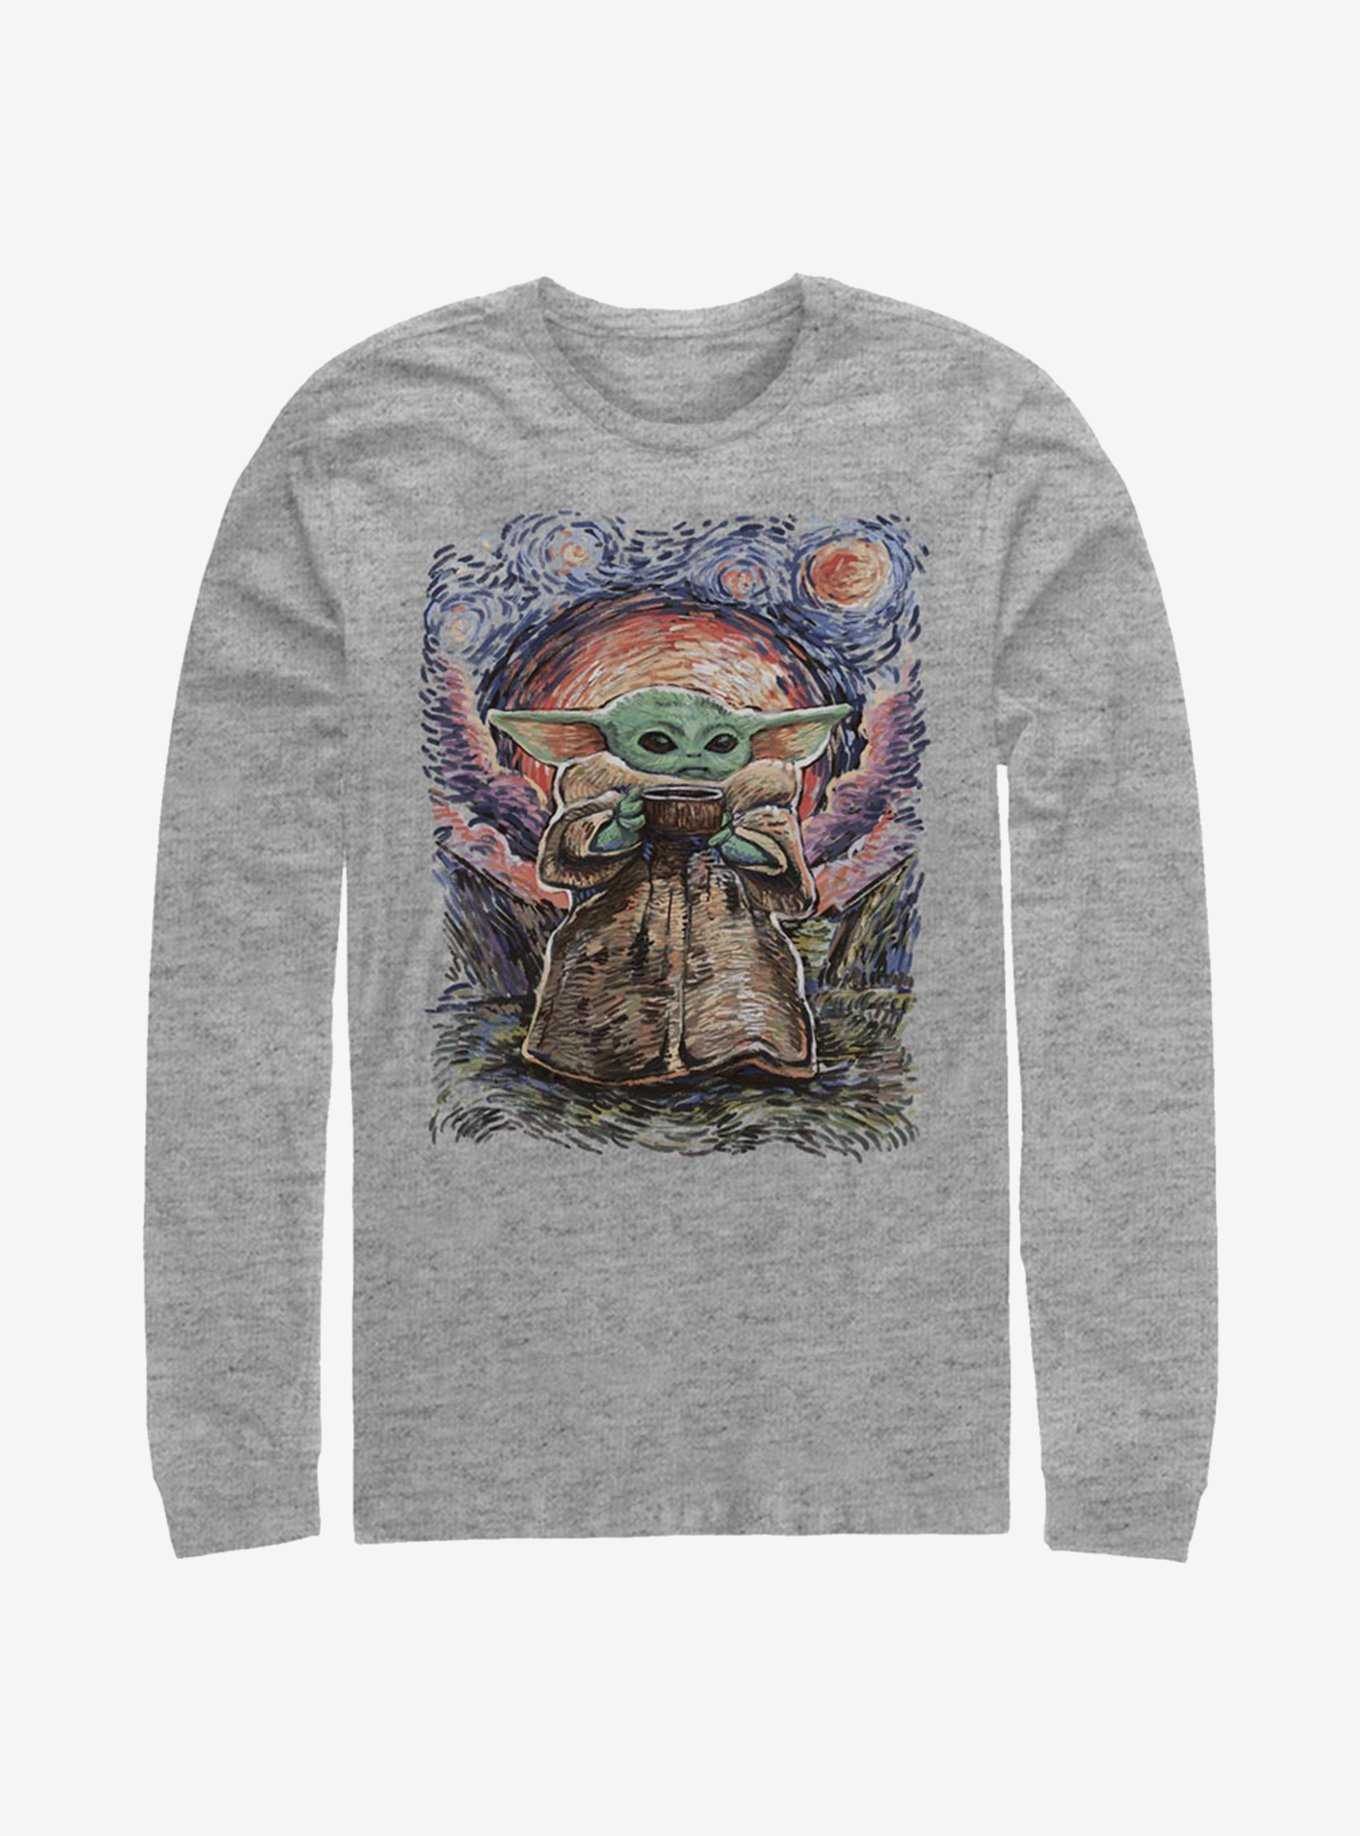 Star Wars The Mandalorian The Child Sipping Night Sky Long-Sleeve T-Shirt, , hi-res